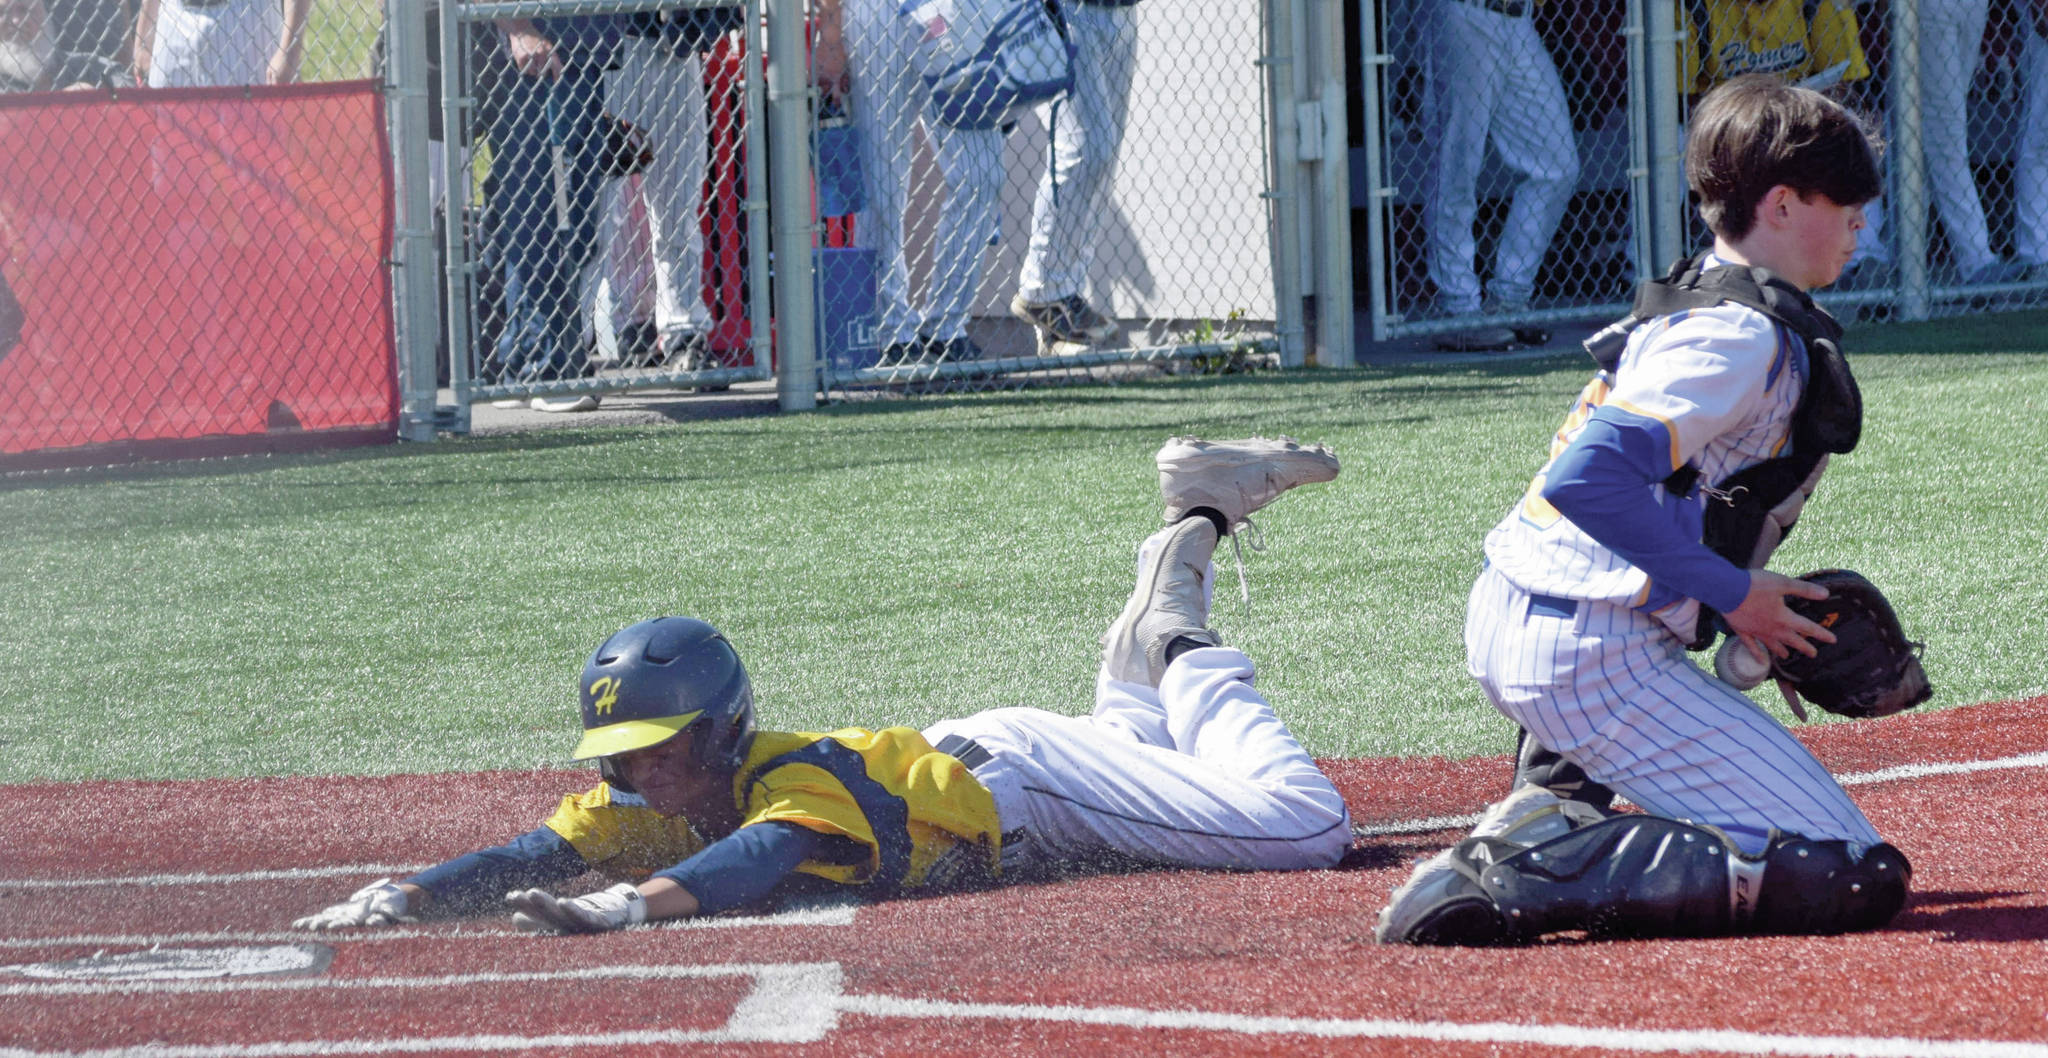 Mylan Johnson slides head first into home plate to score for Homer at the Division II state baseball tournament in Wasilla, Alaska, on Saturday, June 5, 2021. (Camille Botello / Peninsula Clarion)